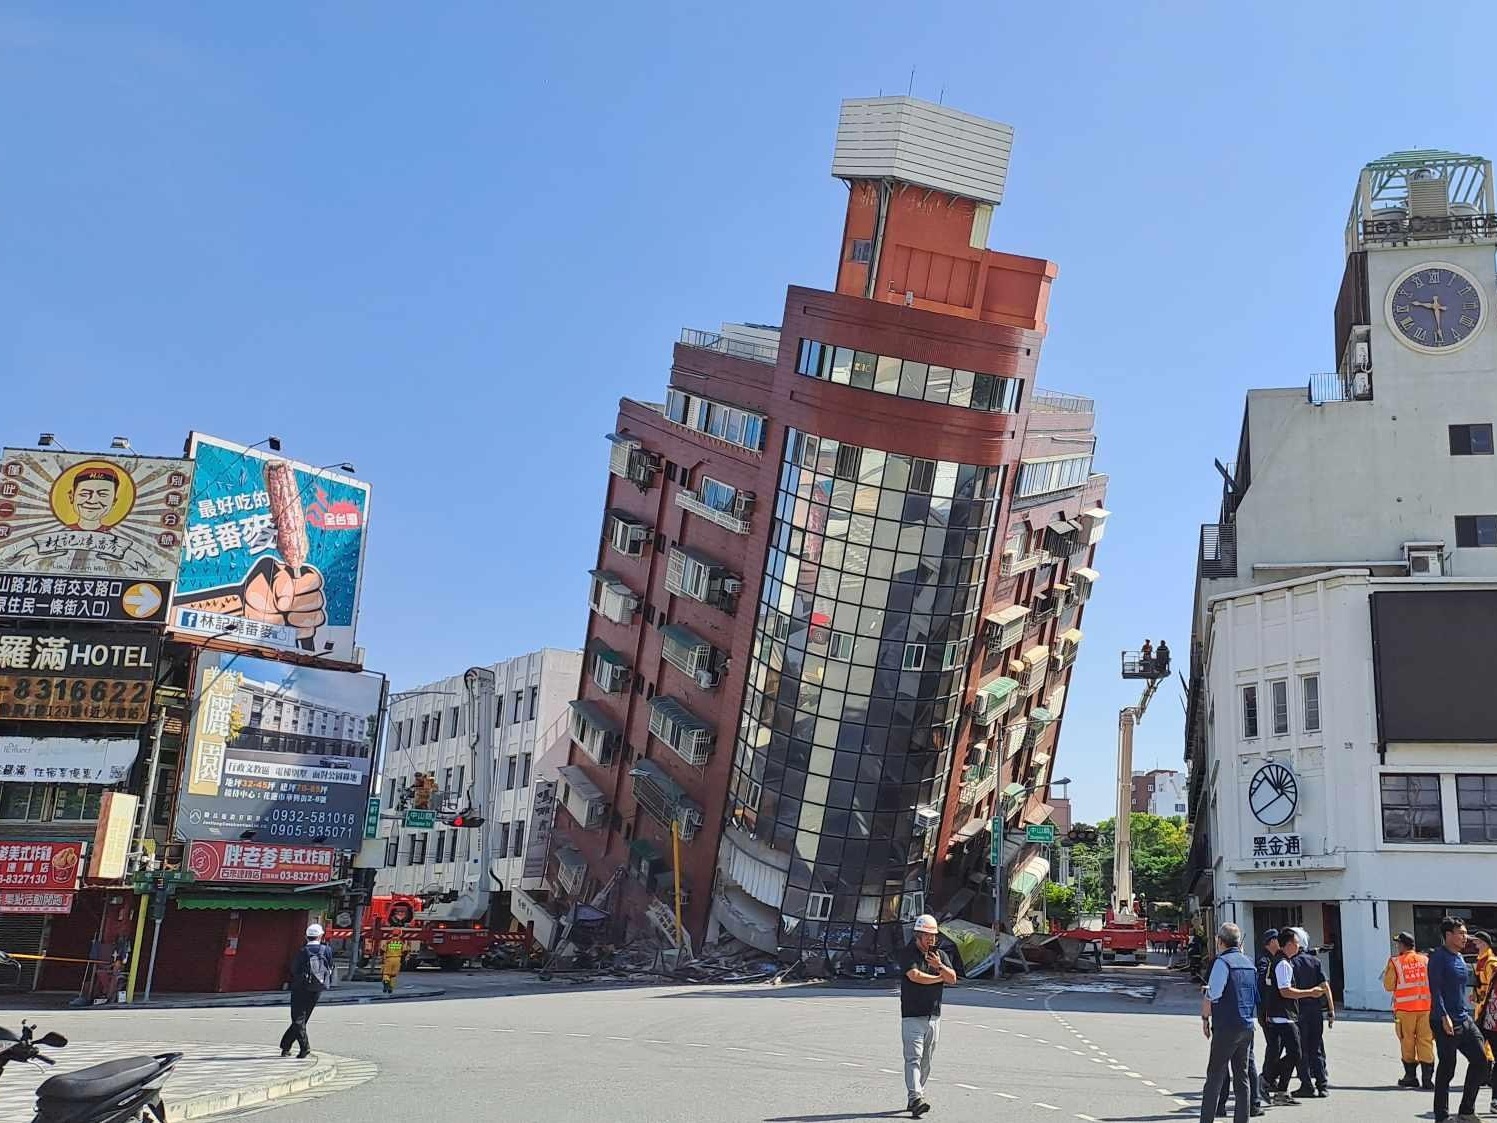 Photos: See the aftermath of the Taiwan earthquake